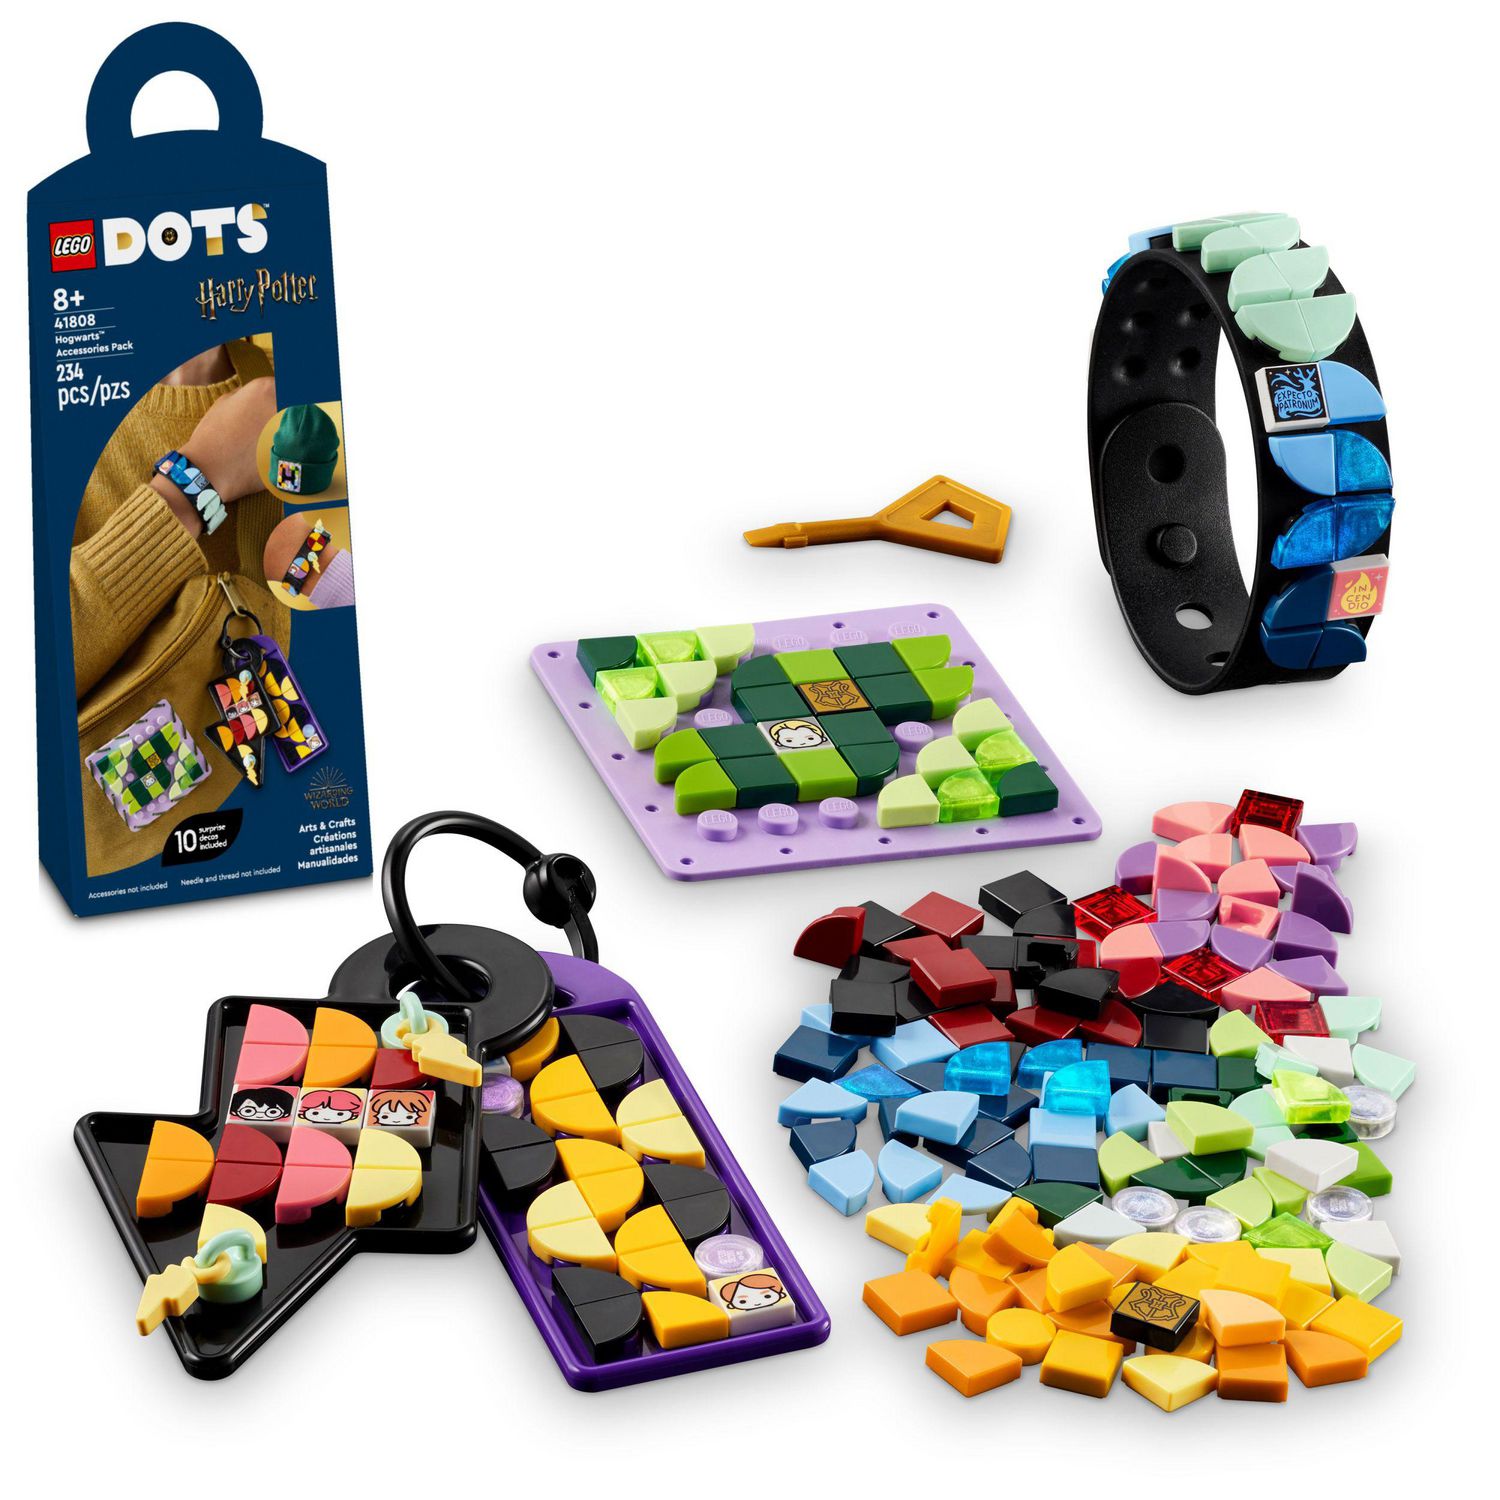 LEGO DOTS Hogwarts Desktop Kit 41811, DIY Harry Potter Back to School  Accessories and Supplies, Desk Décor Items and Patch Sticker, Crafts Toys